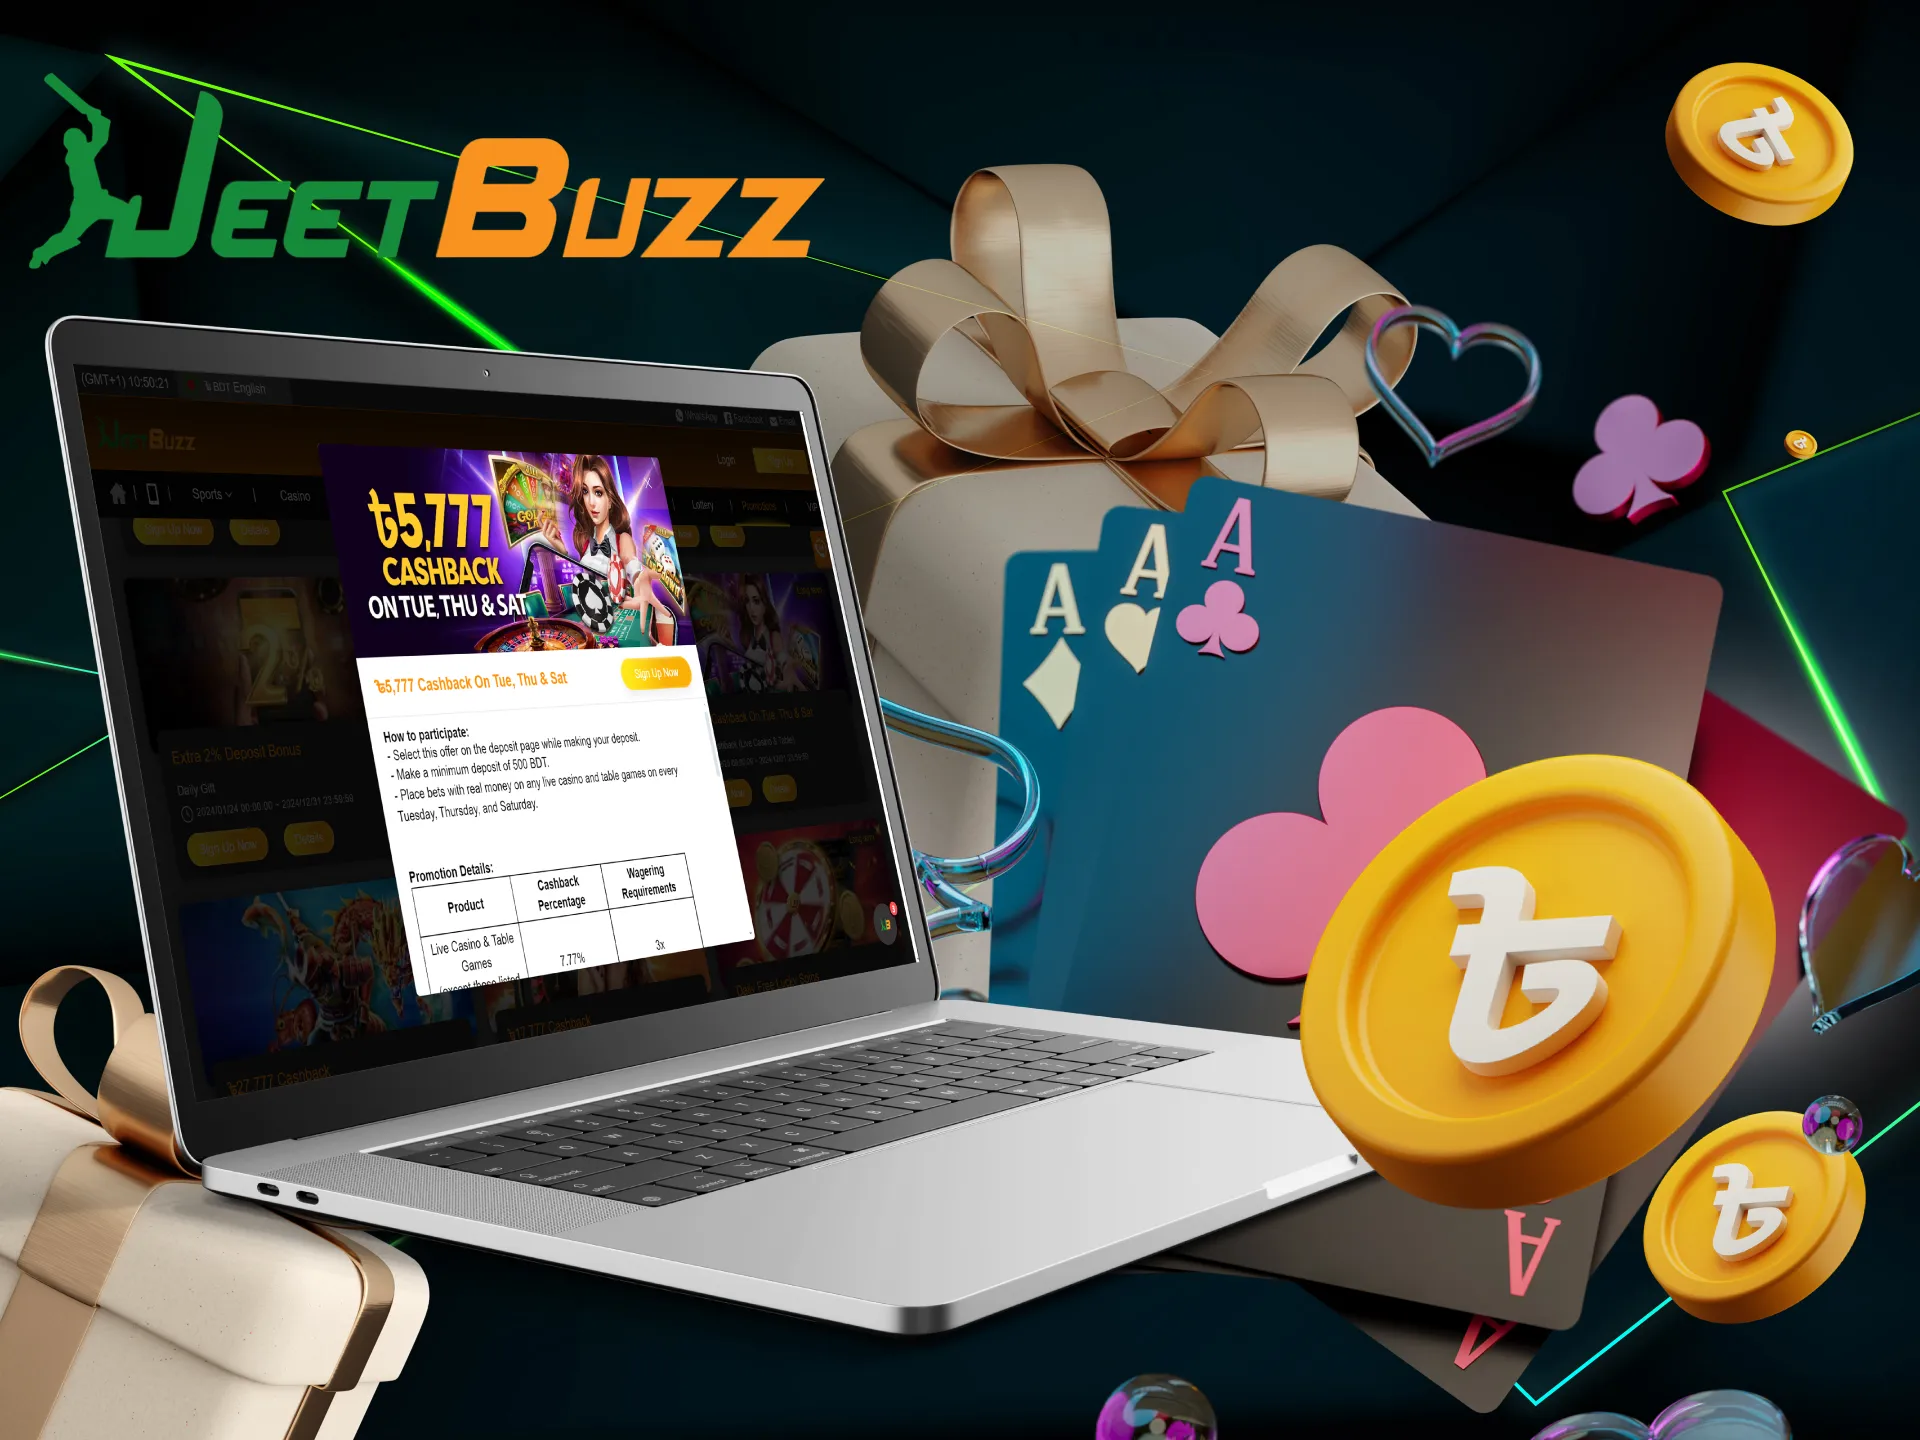 By betting on certain days you get a generous cashback of up to ৳5,777.